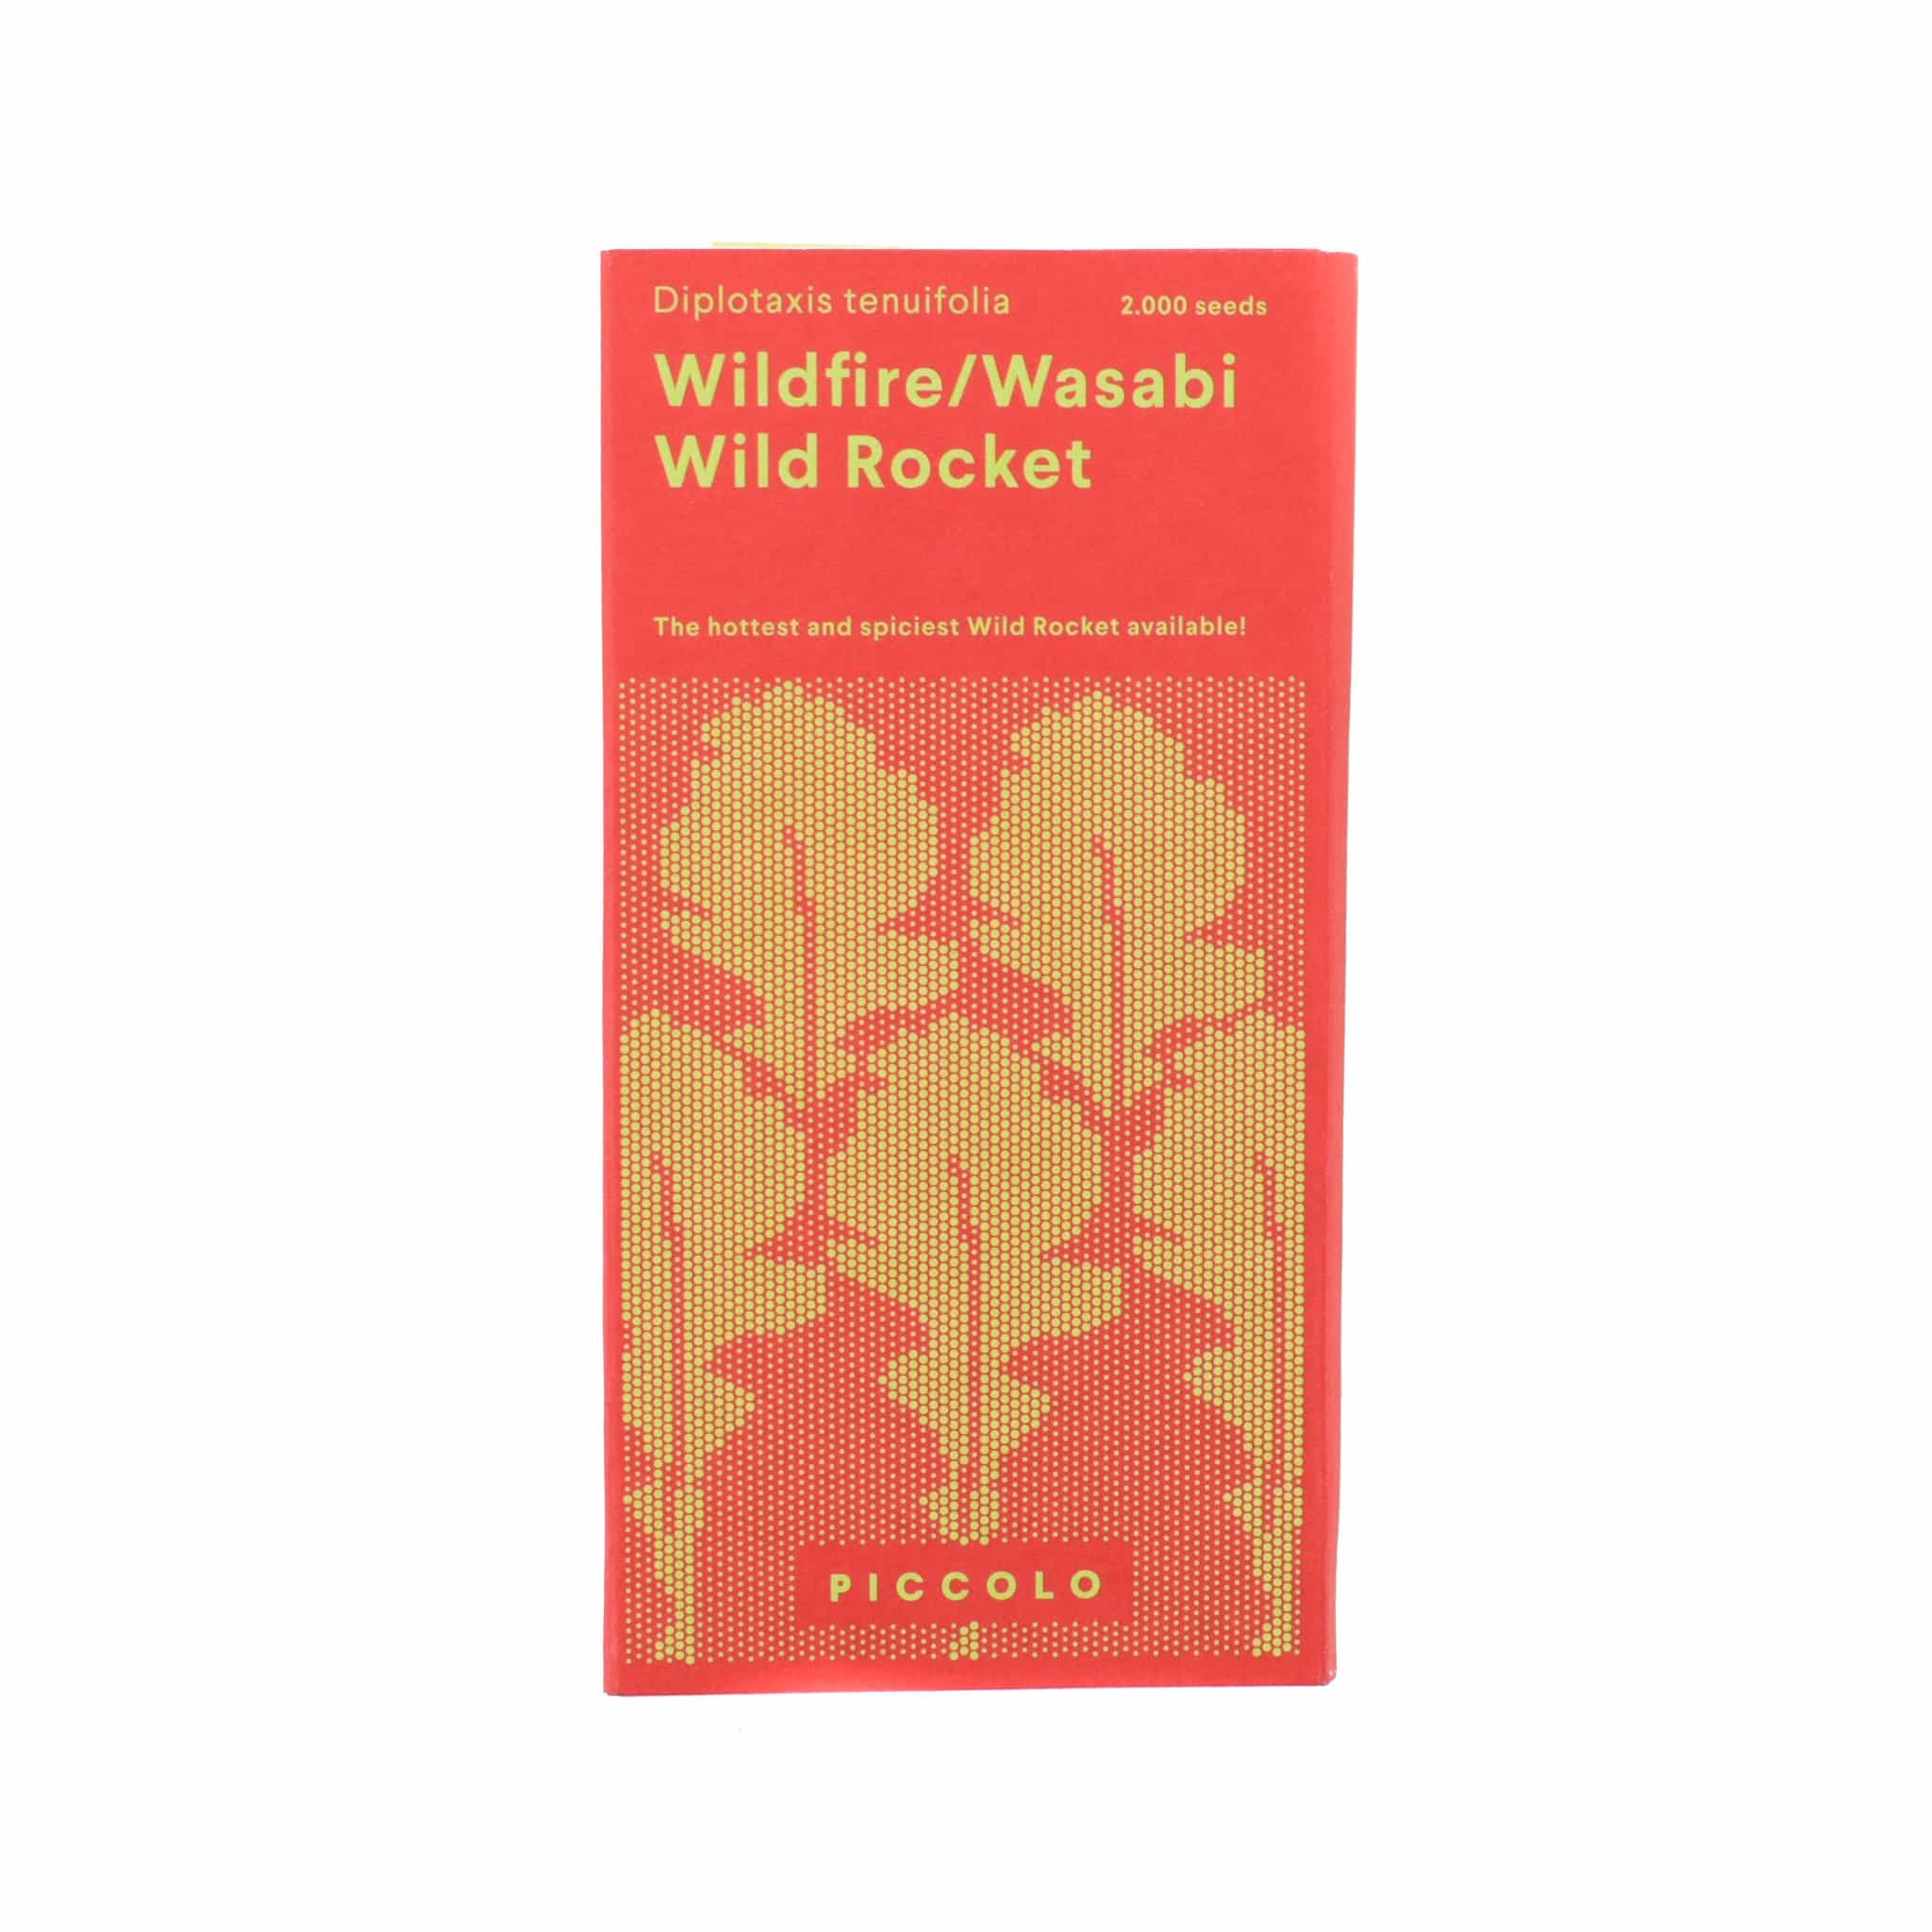 Piccolo Wildfire Wasabi Rocket Seeds